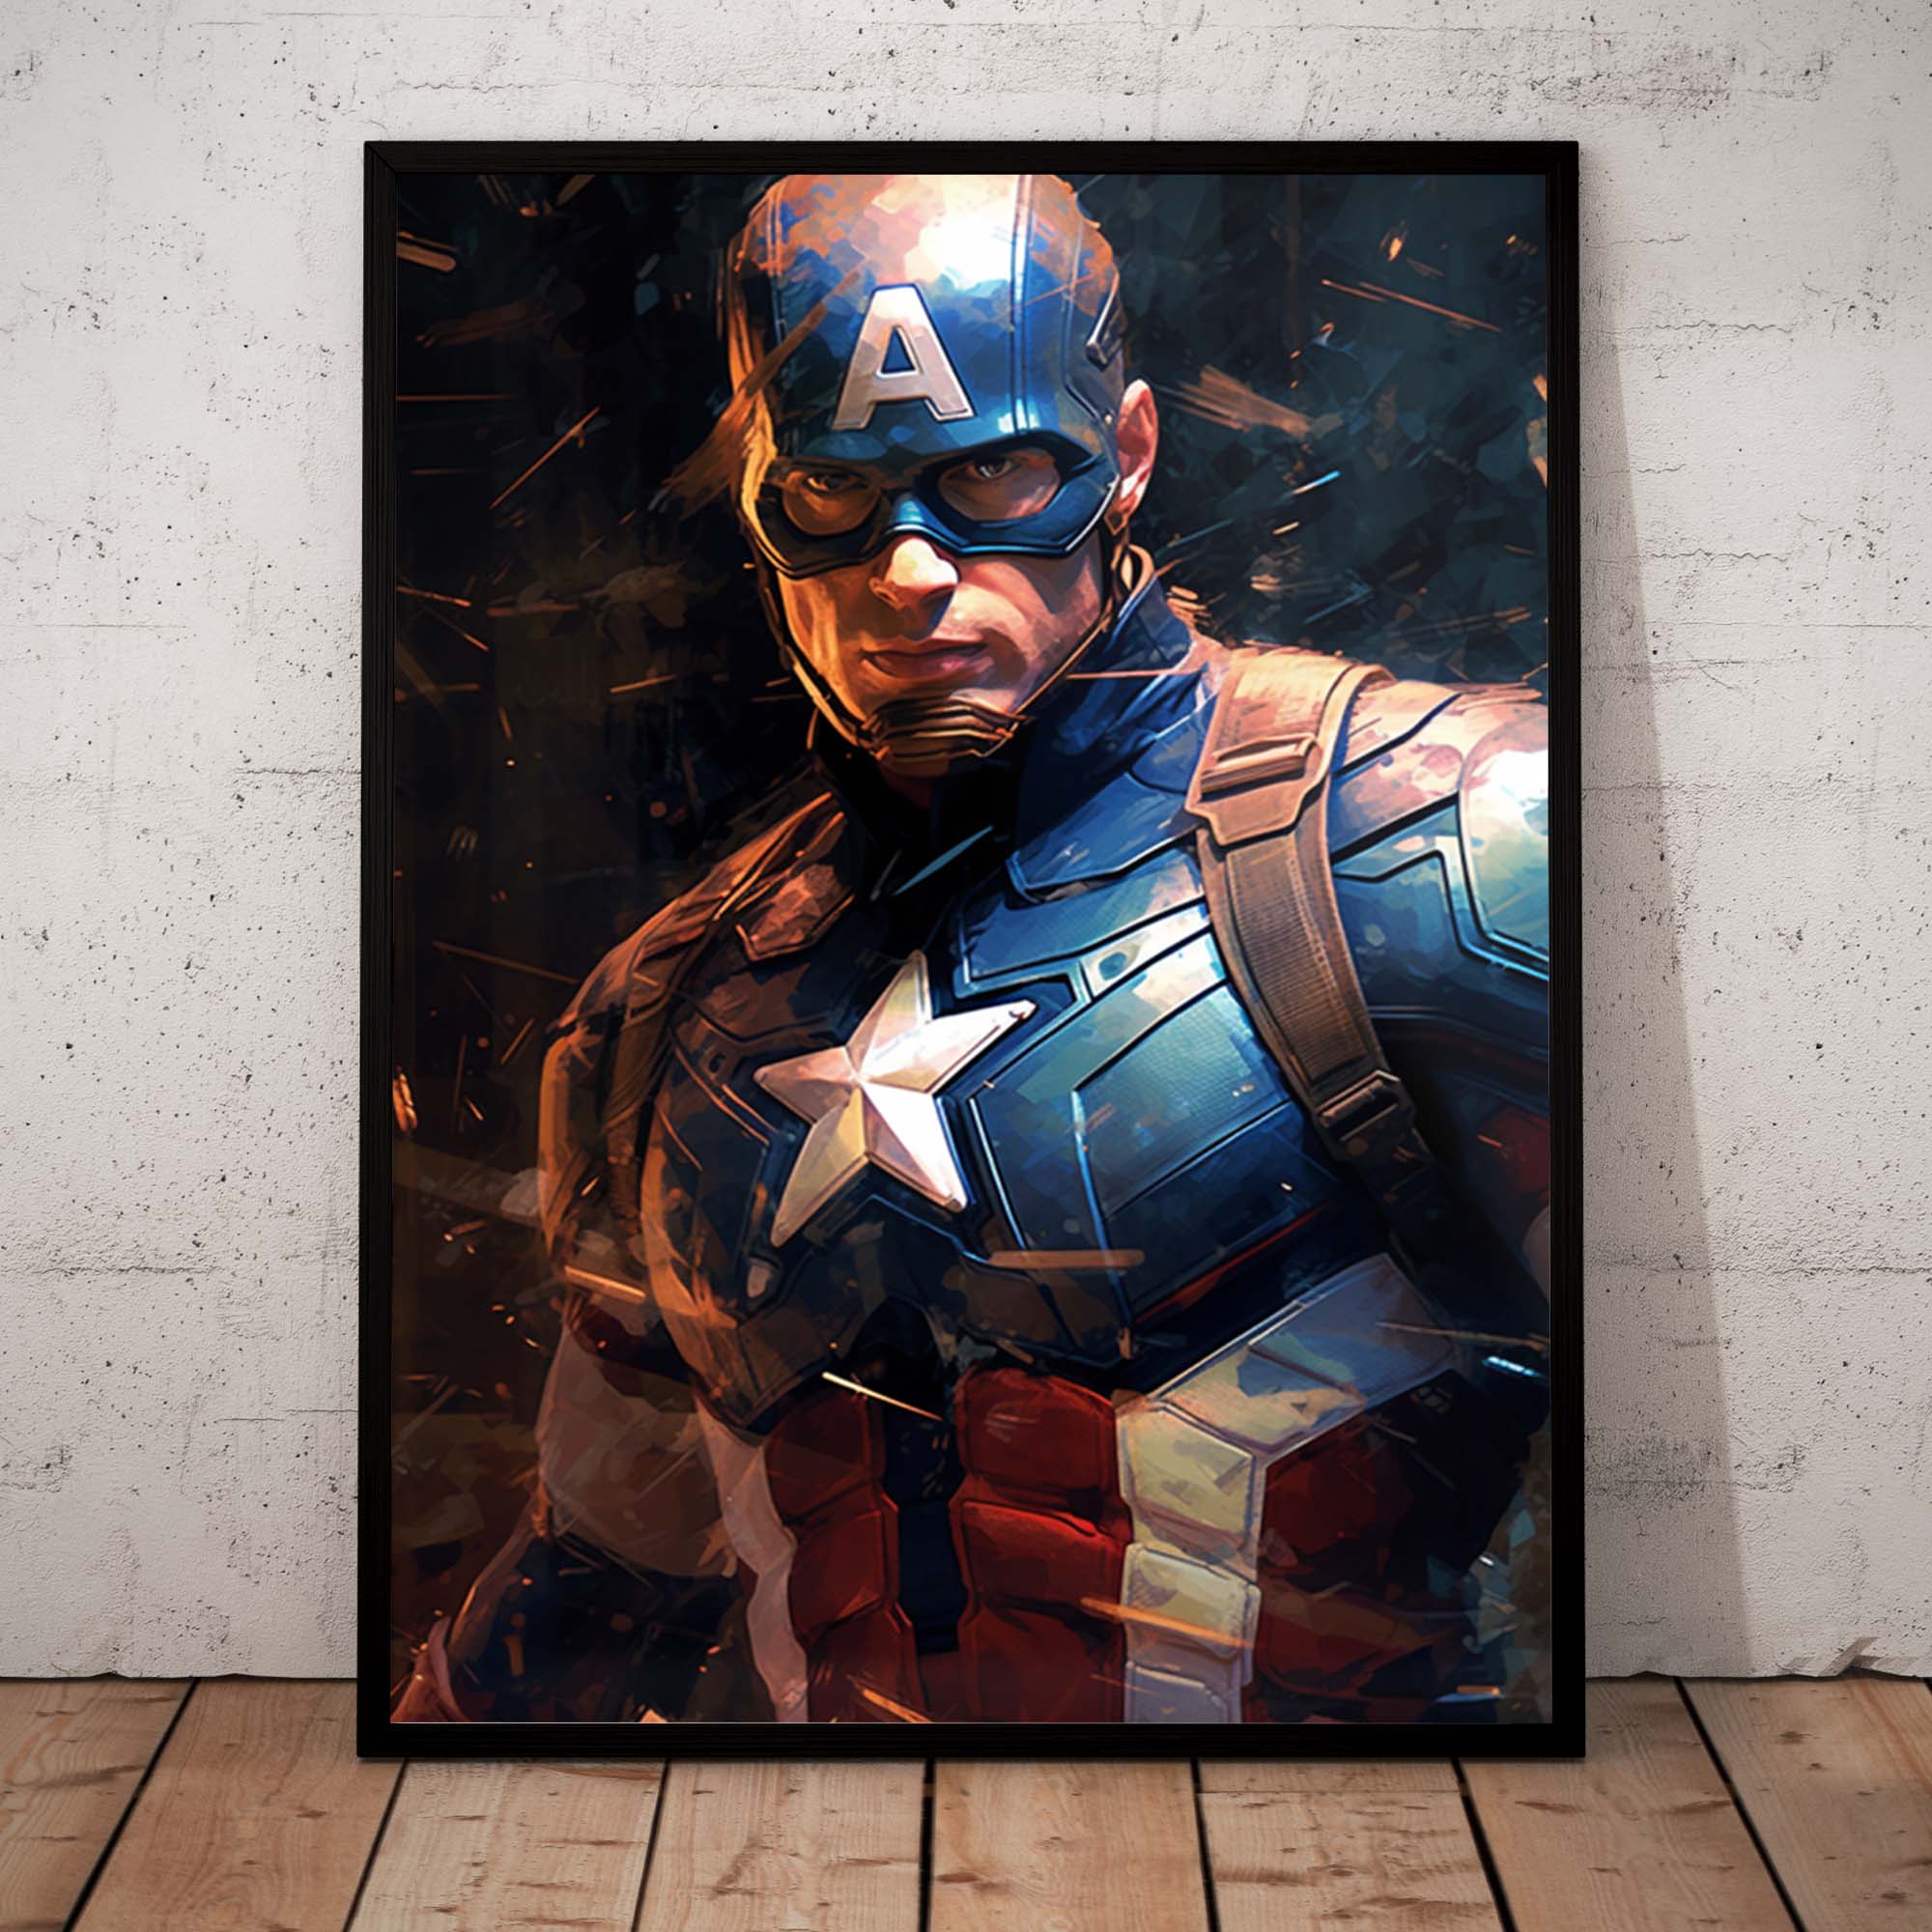 Cpt America 01 - Poster in frame front